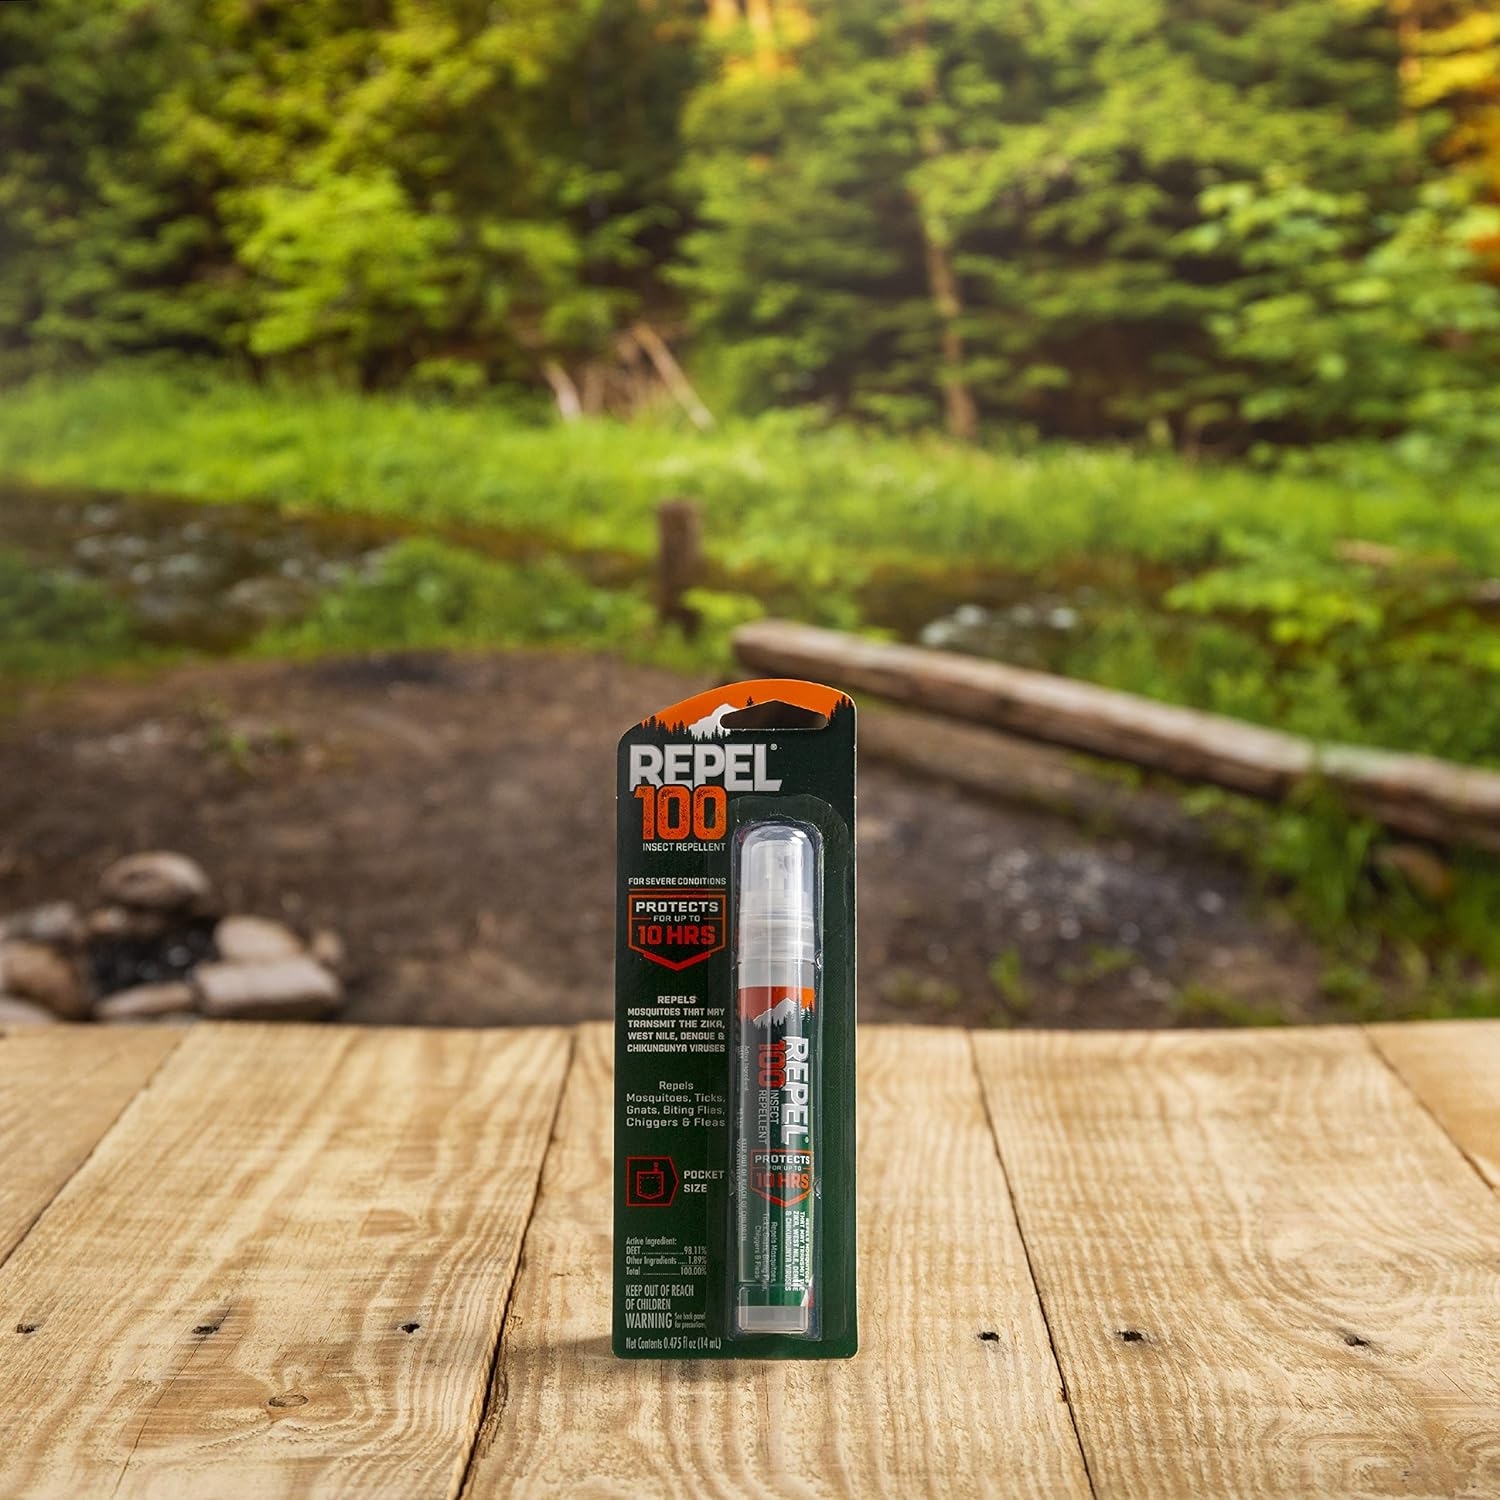 Repel 100 Insect Repellent, Pen-Size Pump Spray, 0.475-Ounce